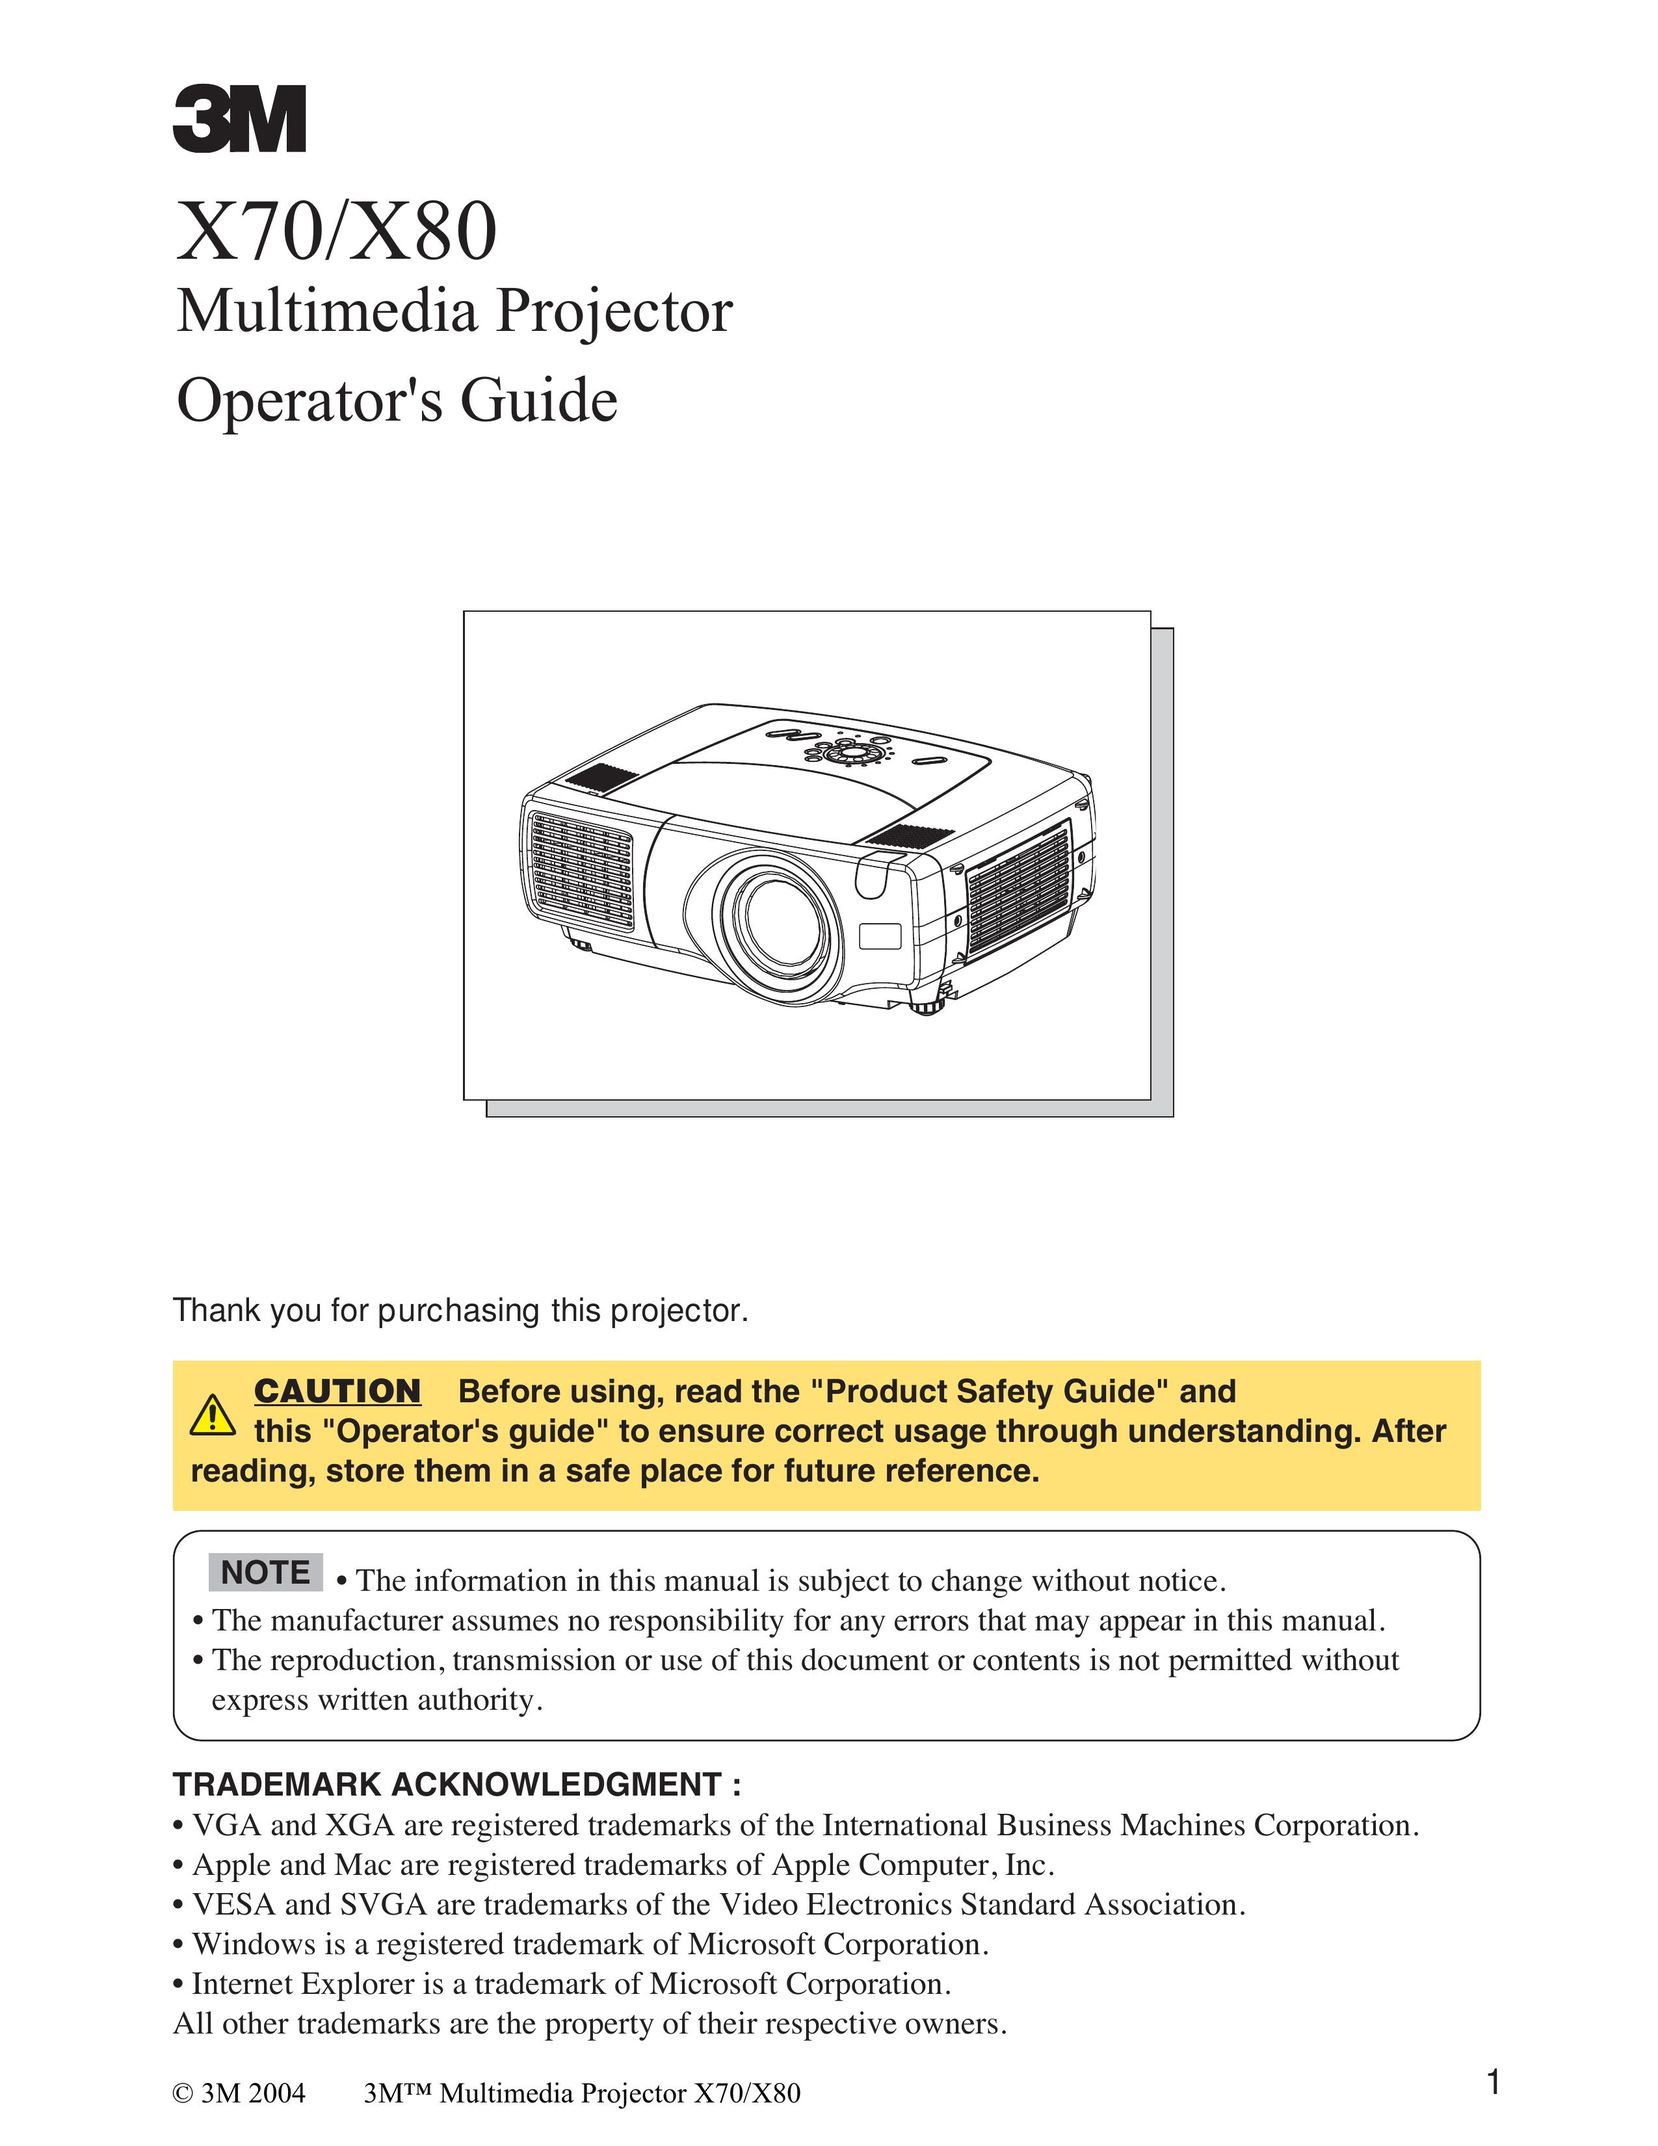 Interlink electronic X70/X80 Projector User Manual